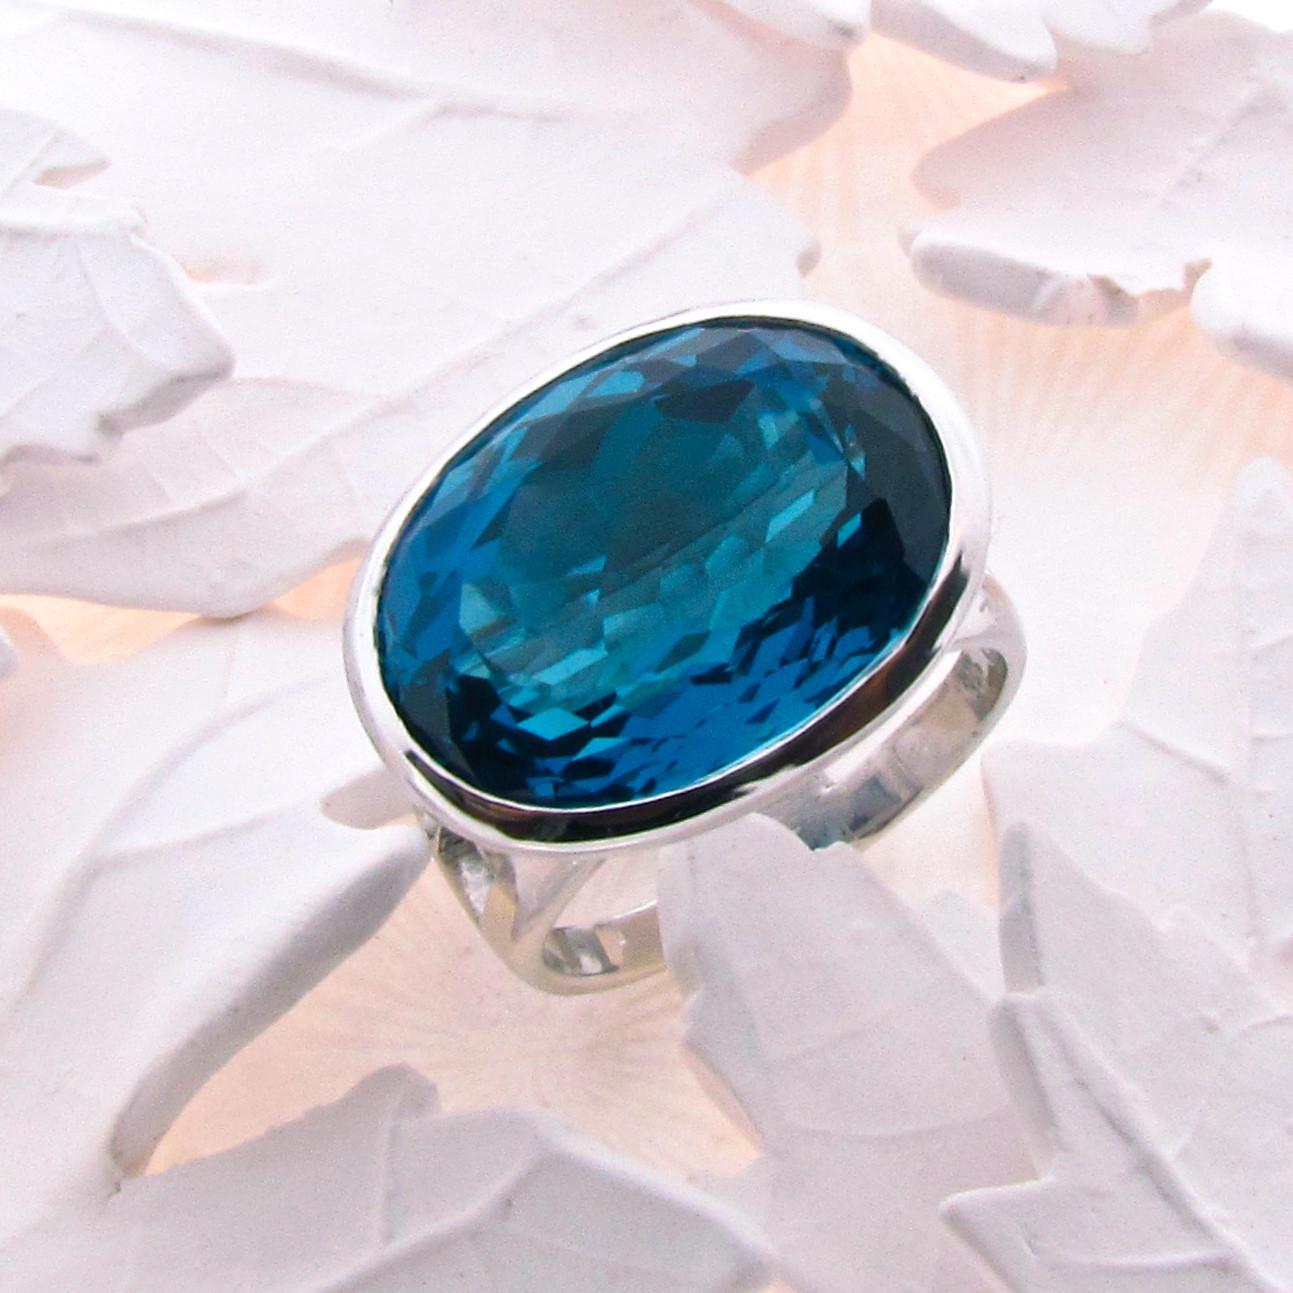 Introducing the 9k White Gold London Blue Faceted Topaz 'Horizon' Ring, a stunning and captivating piece of jewelry. This ring is designed to be striking and eye-catching, while also offering ease and comfort in wear. The centerpiece of this ring is